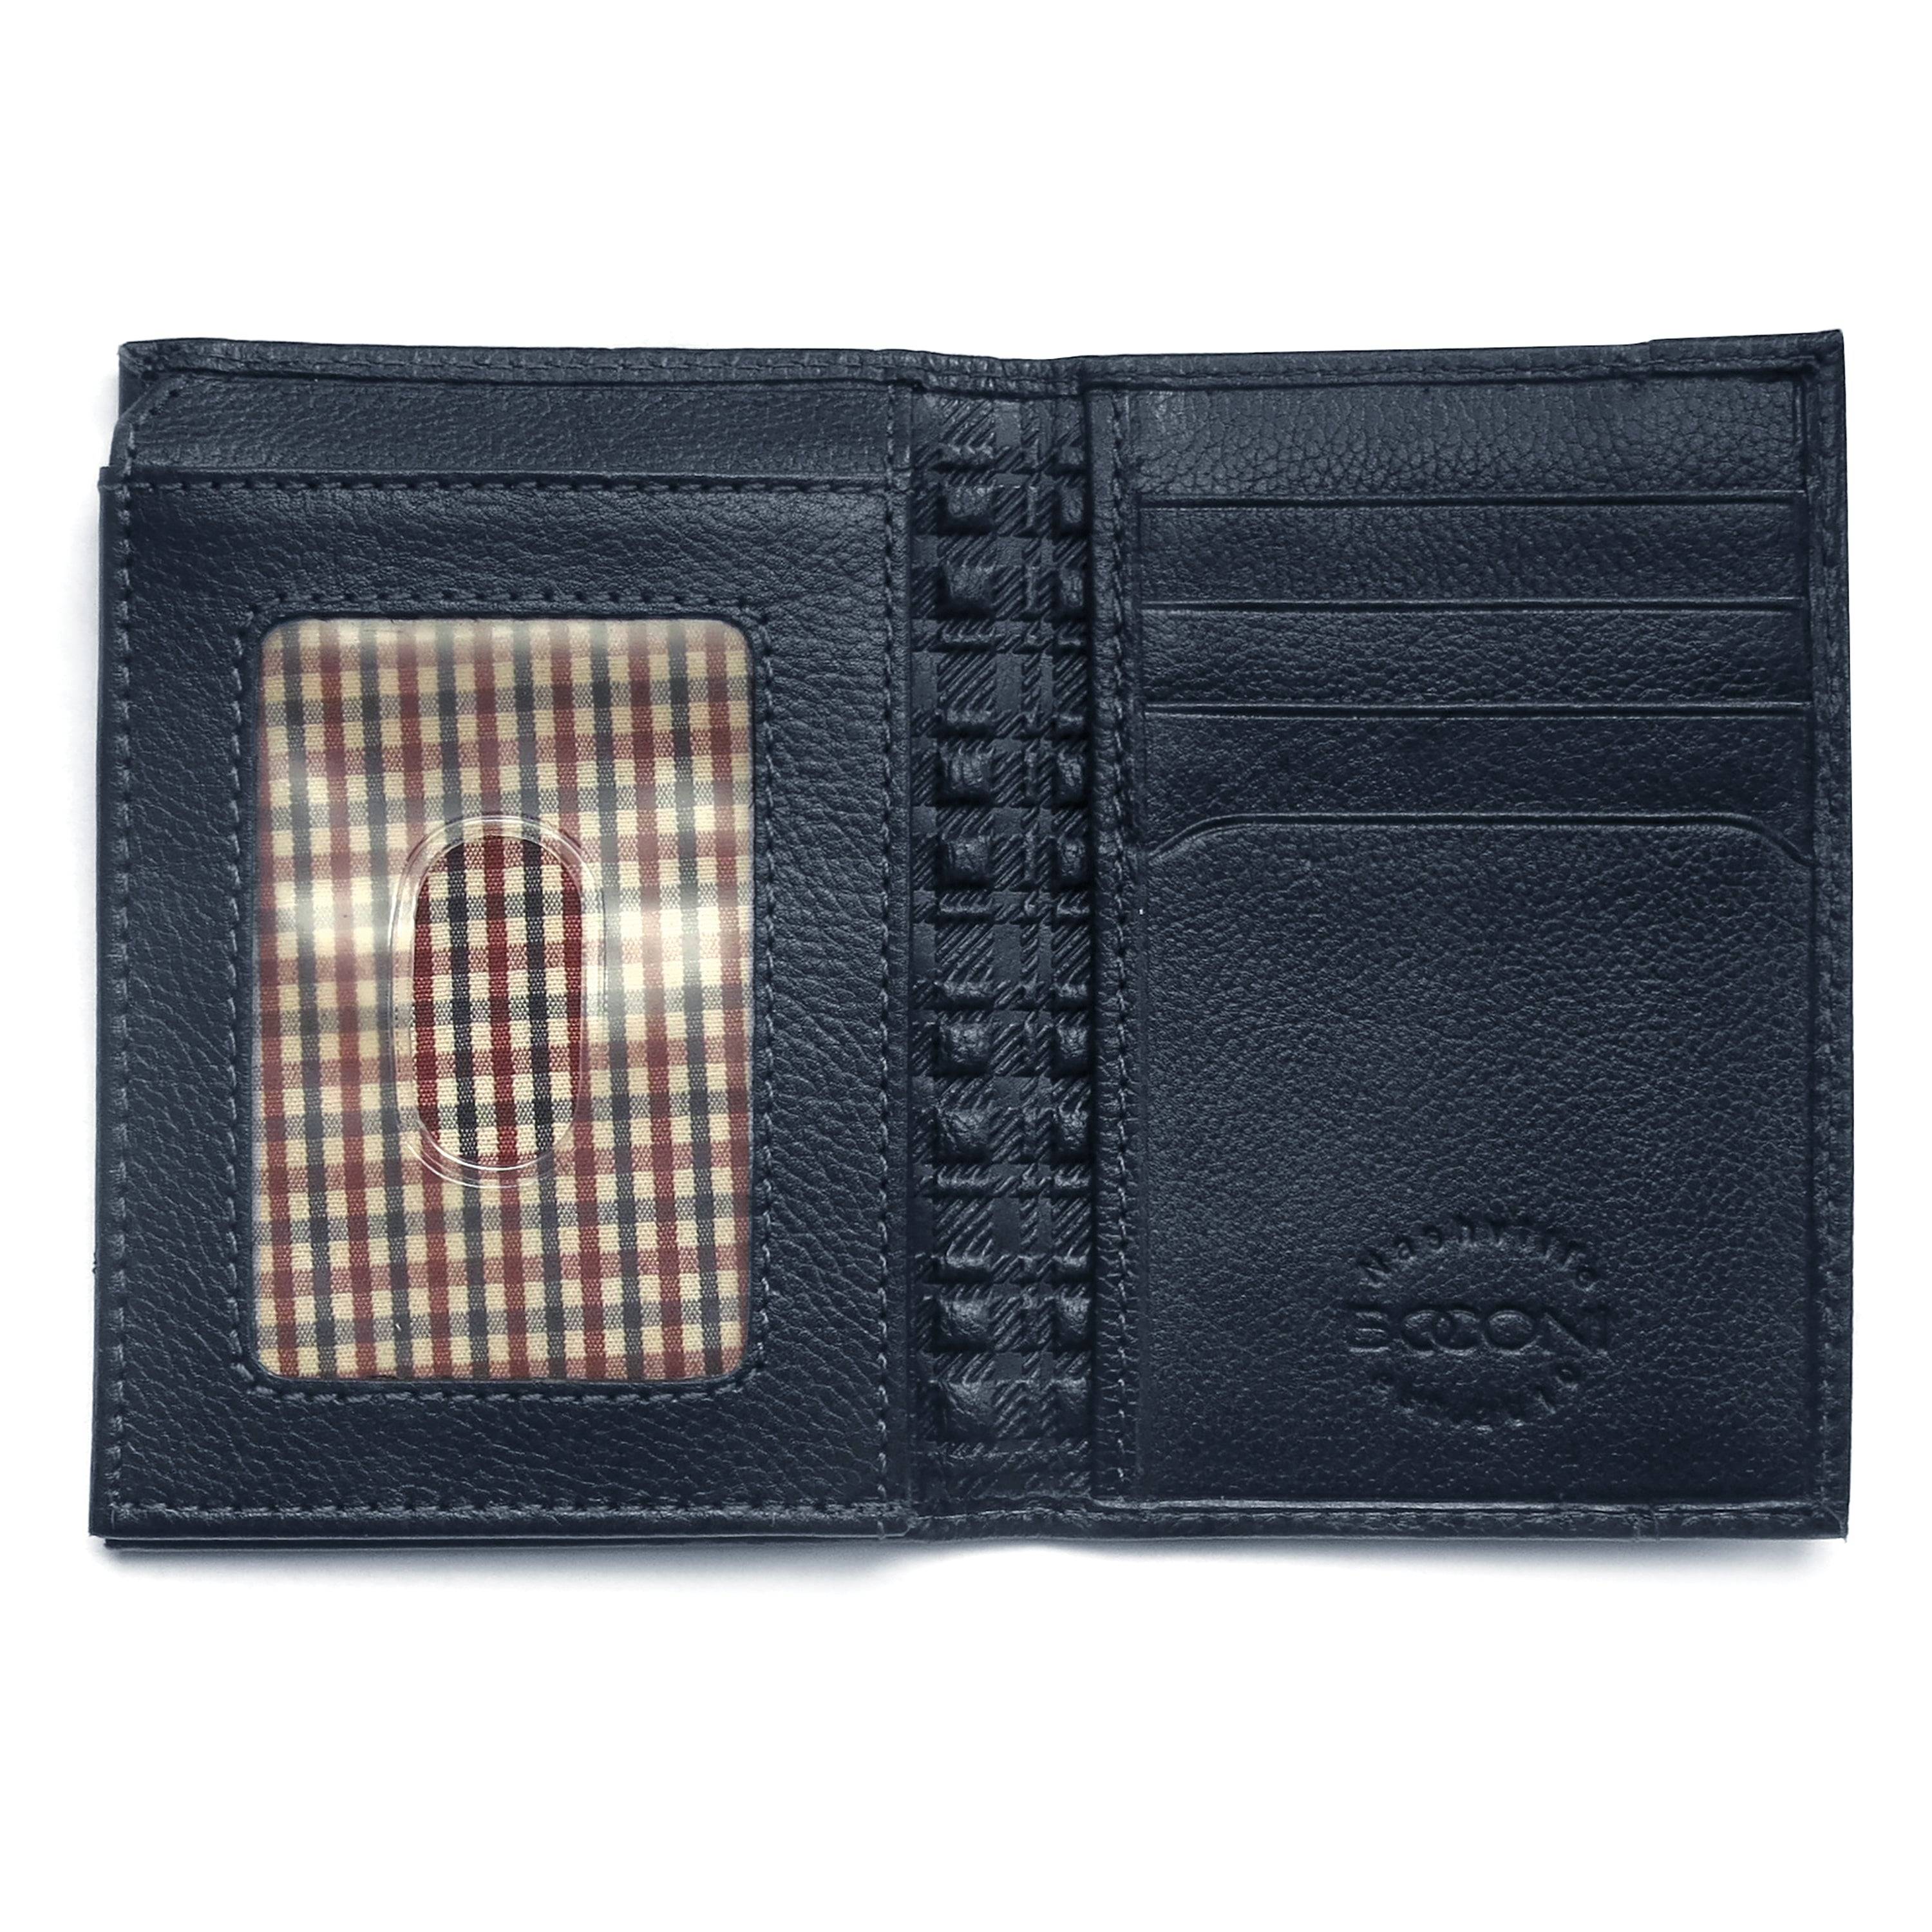 a black leather wallet with a checkered pattern